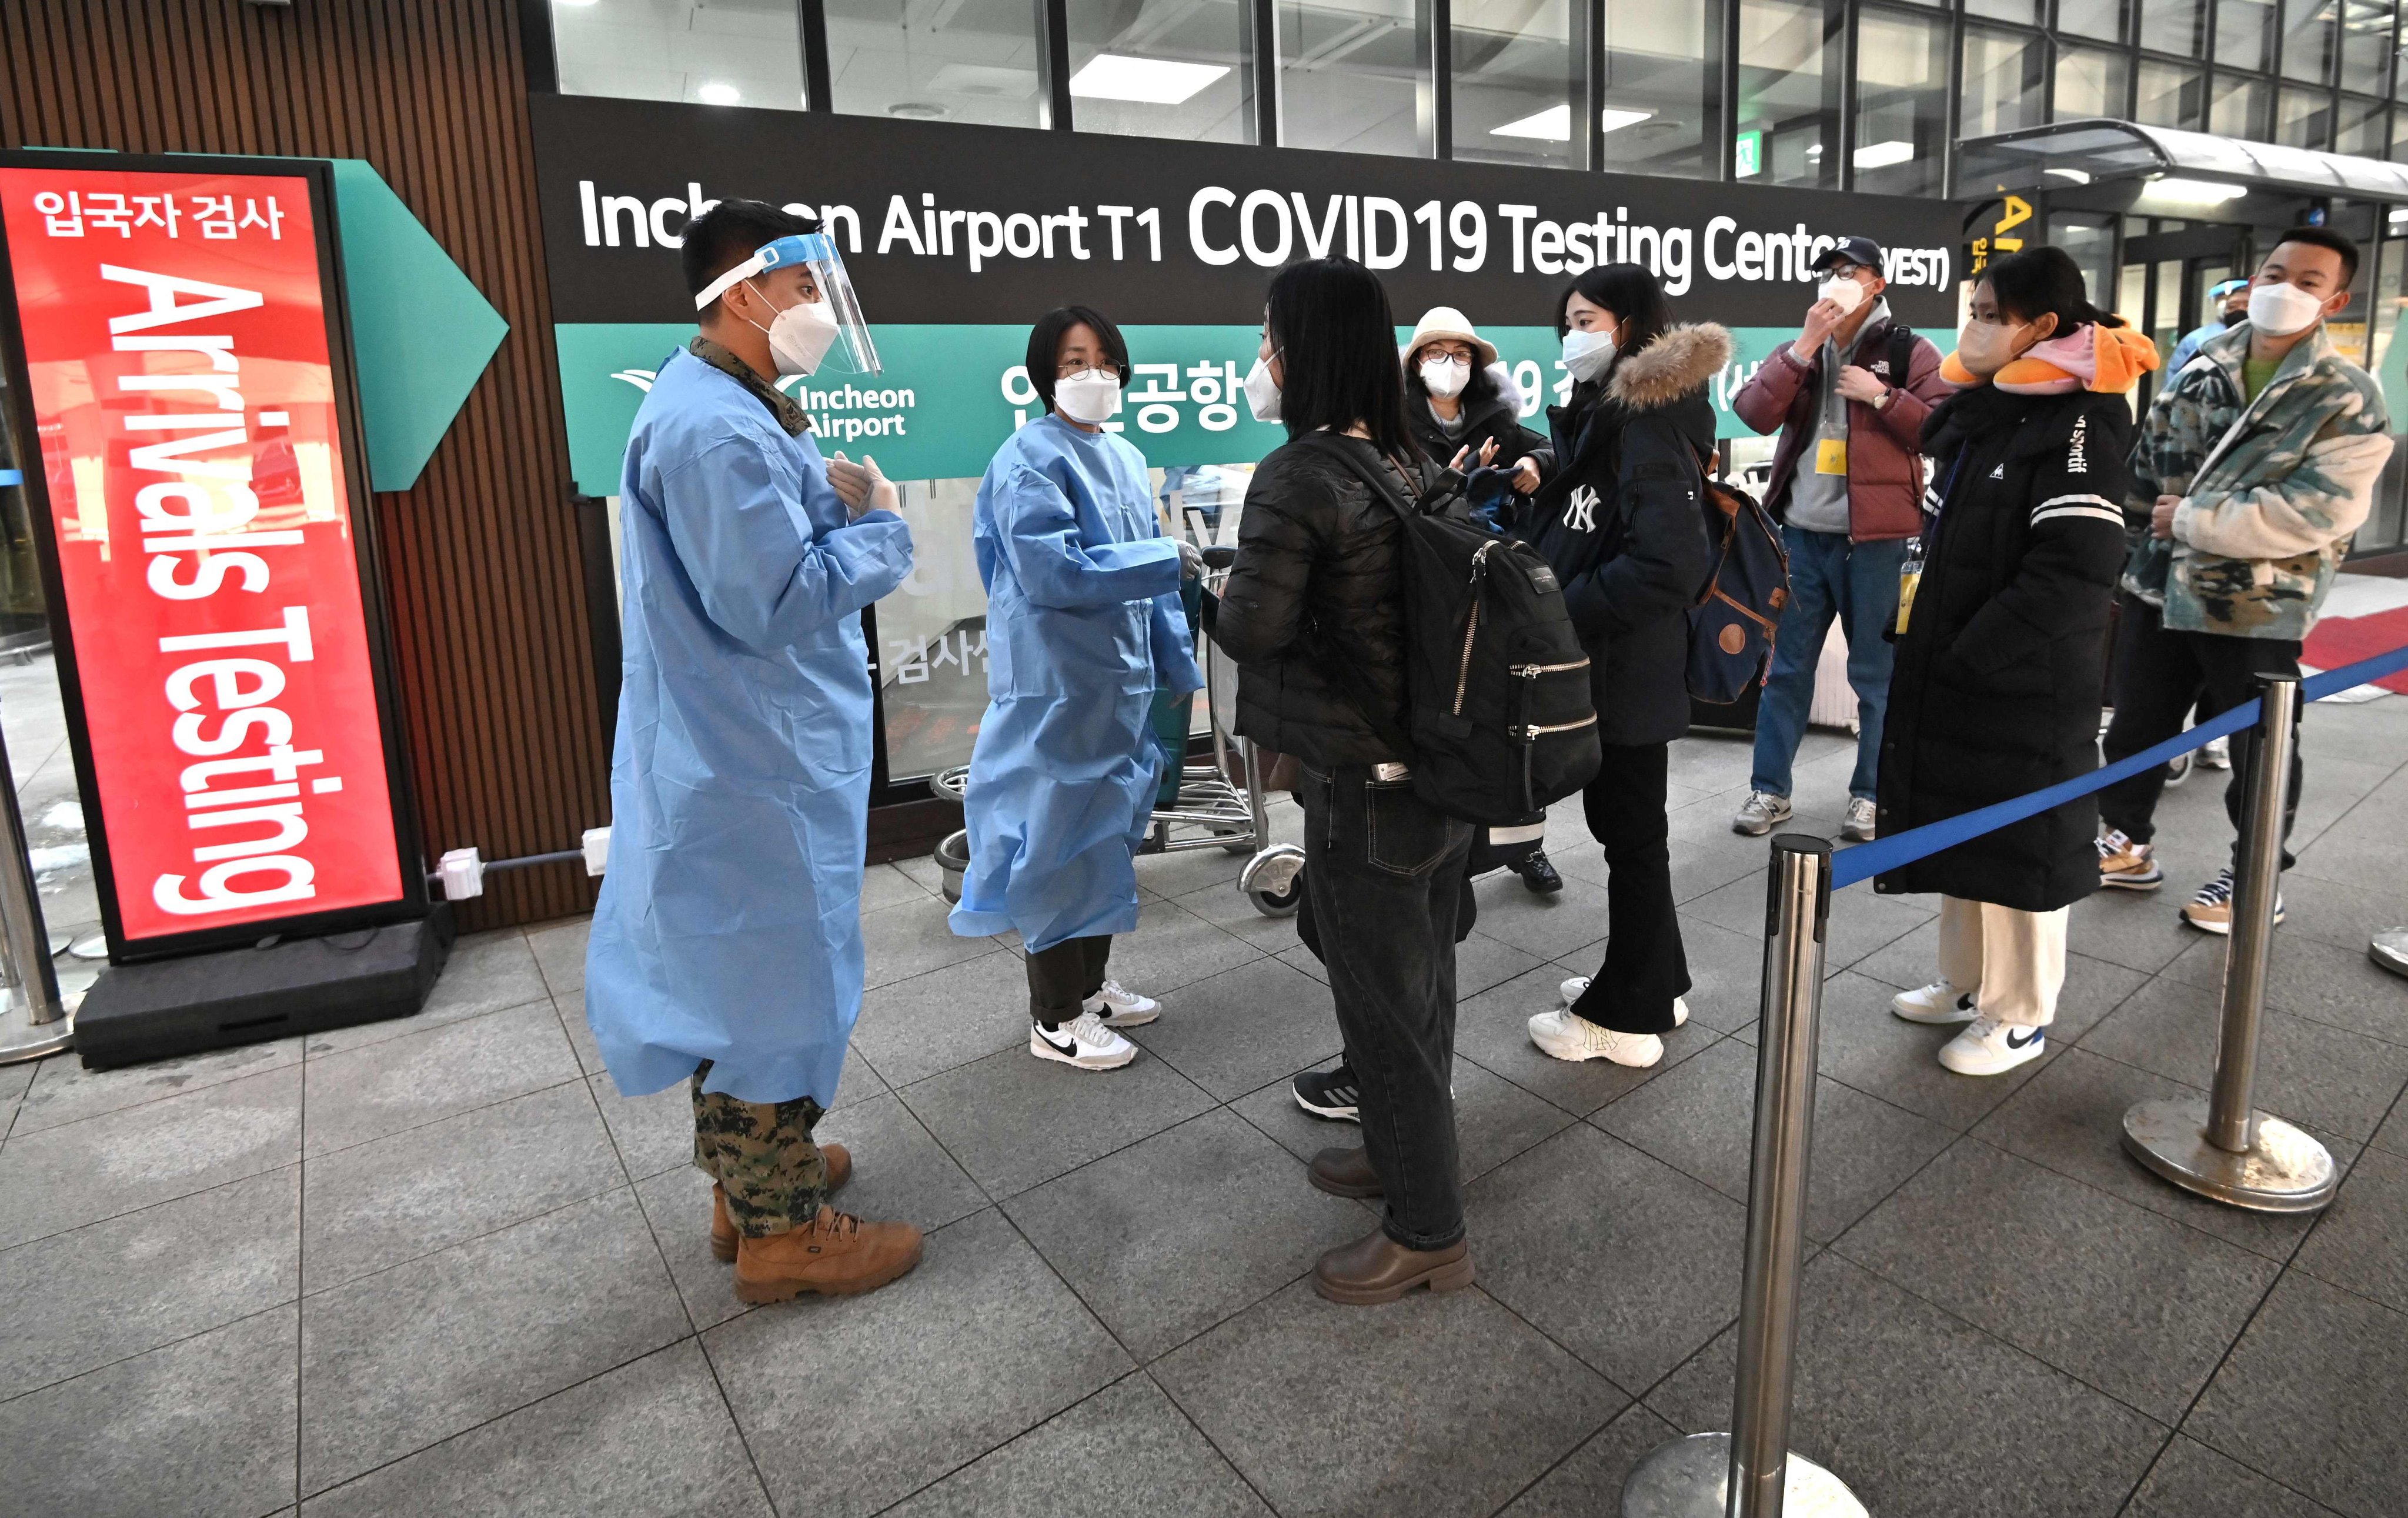 Health workers direct travellers arriving from China to a Covid-19 testing centre at Incheon International Airport on Tuesday. Photo: AFP